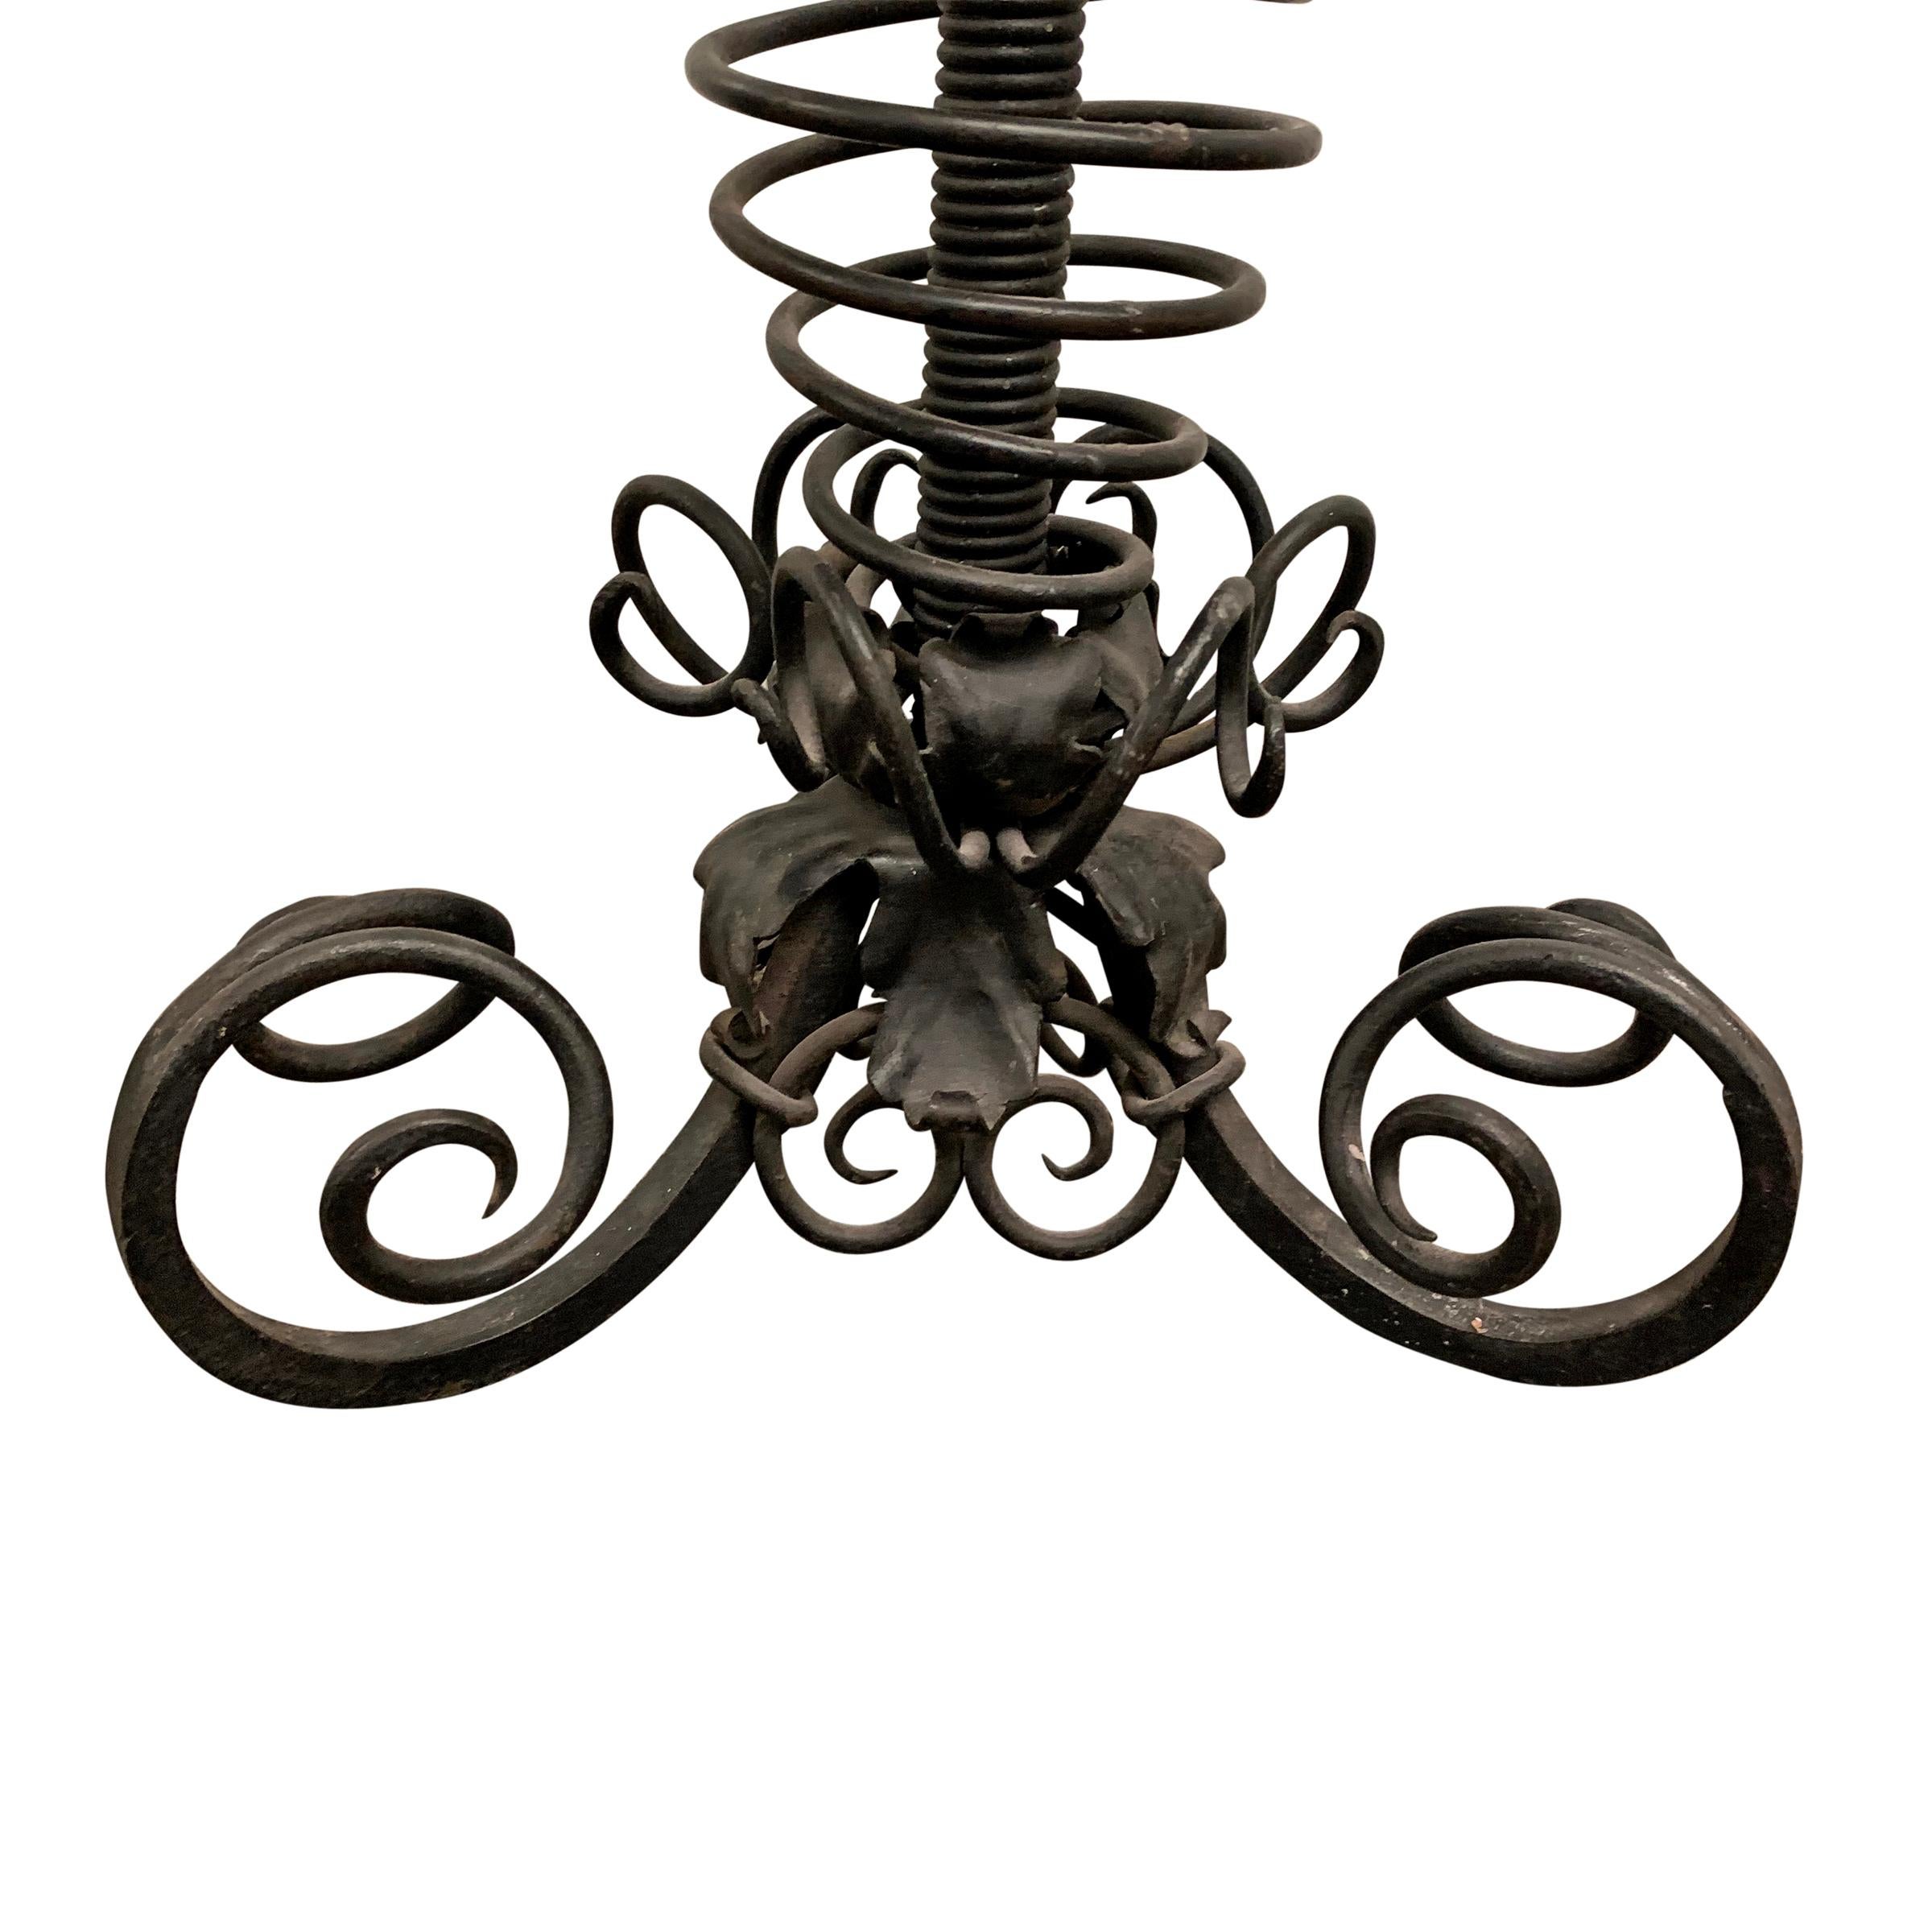 Ridiculous High-Victorian Wrought Iron Candelabrum 4